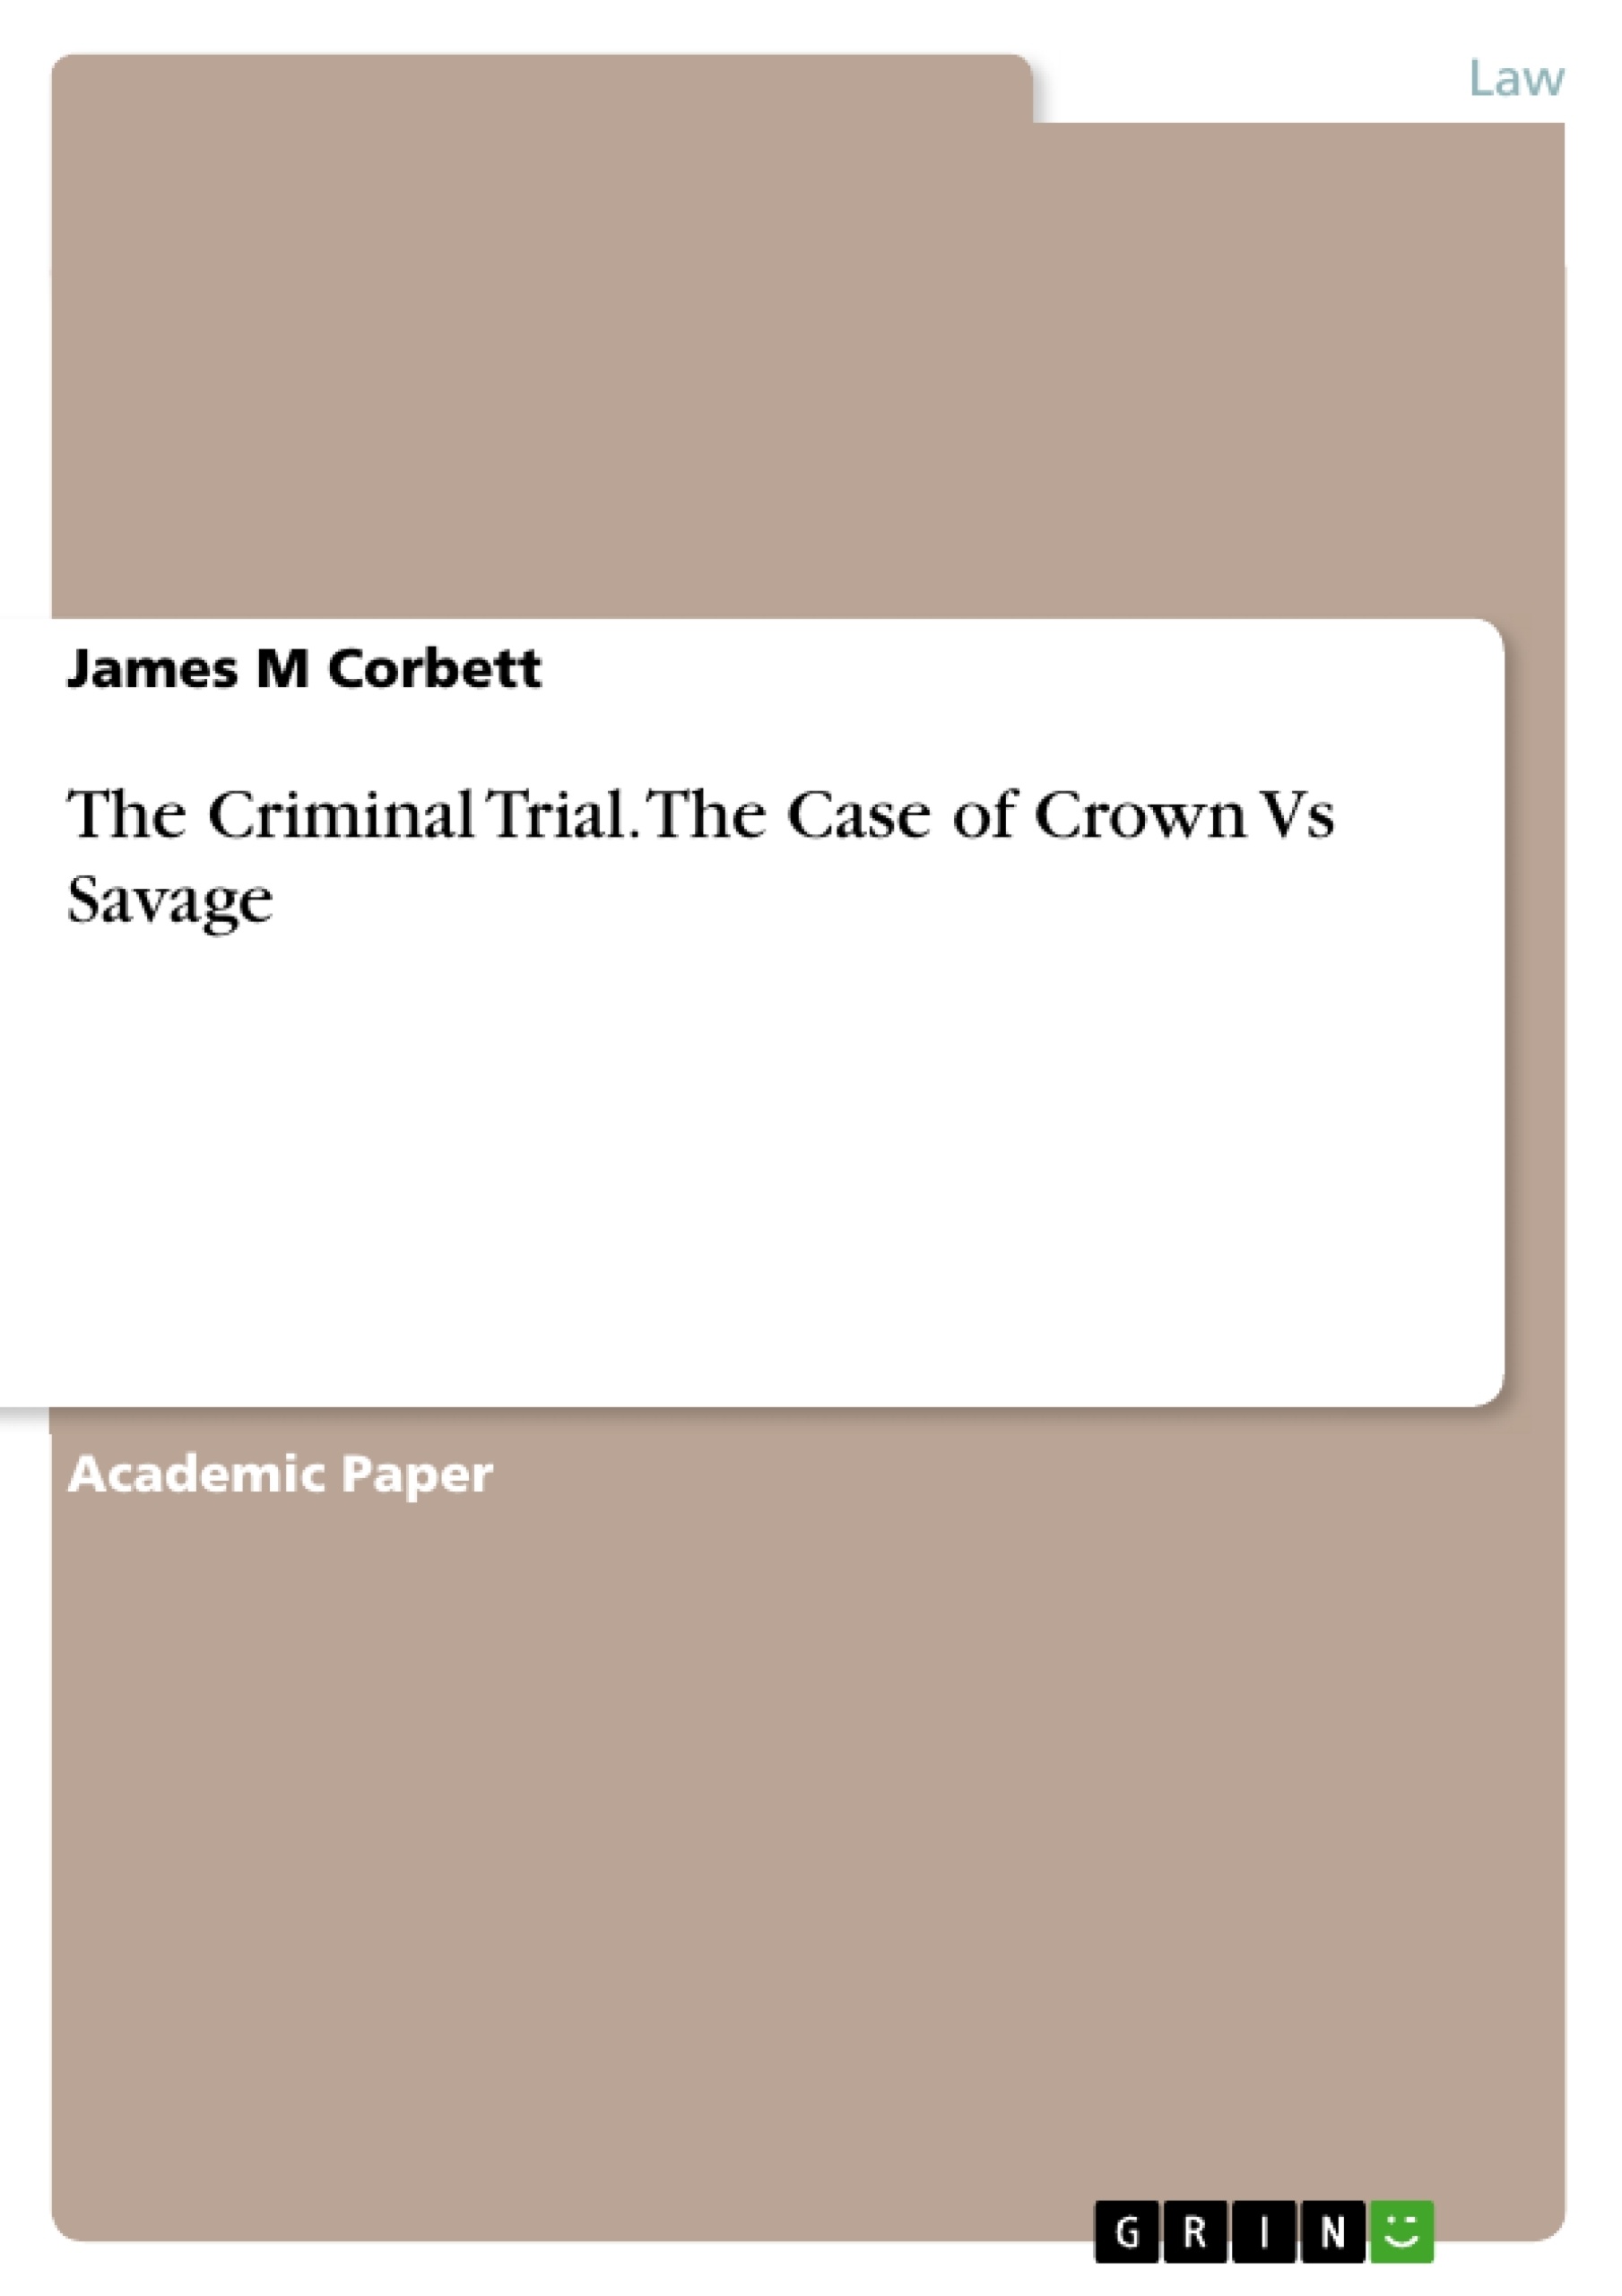 Título: The Criminal Trial. The Case of Crown Vs Savage